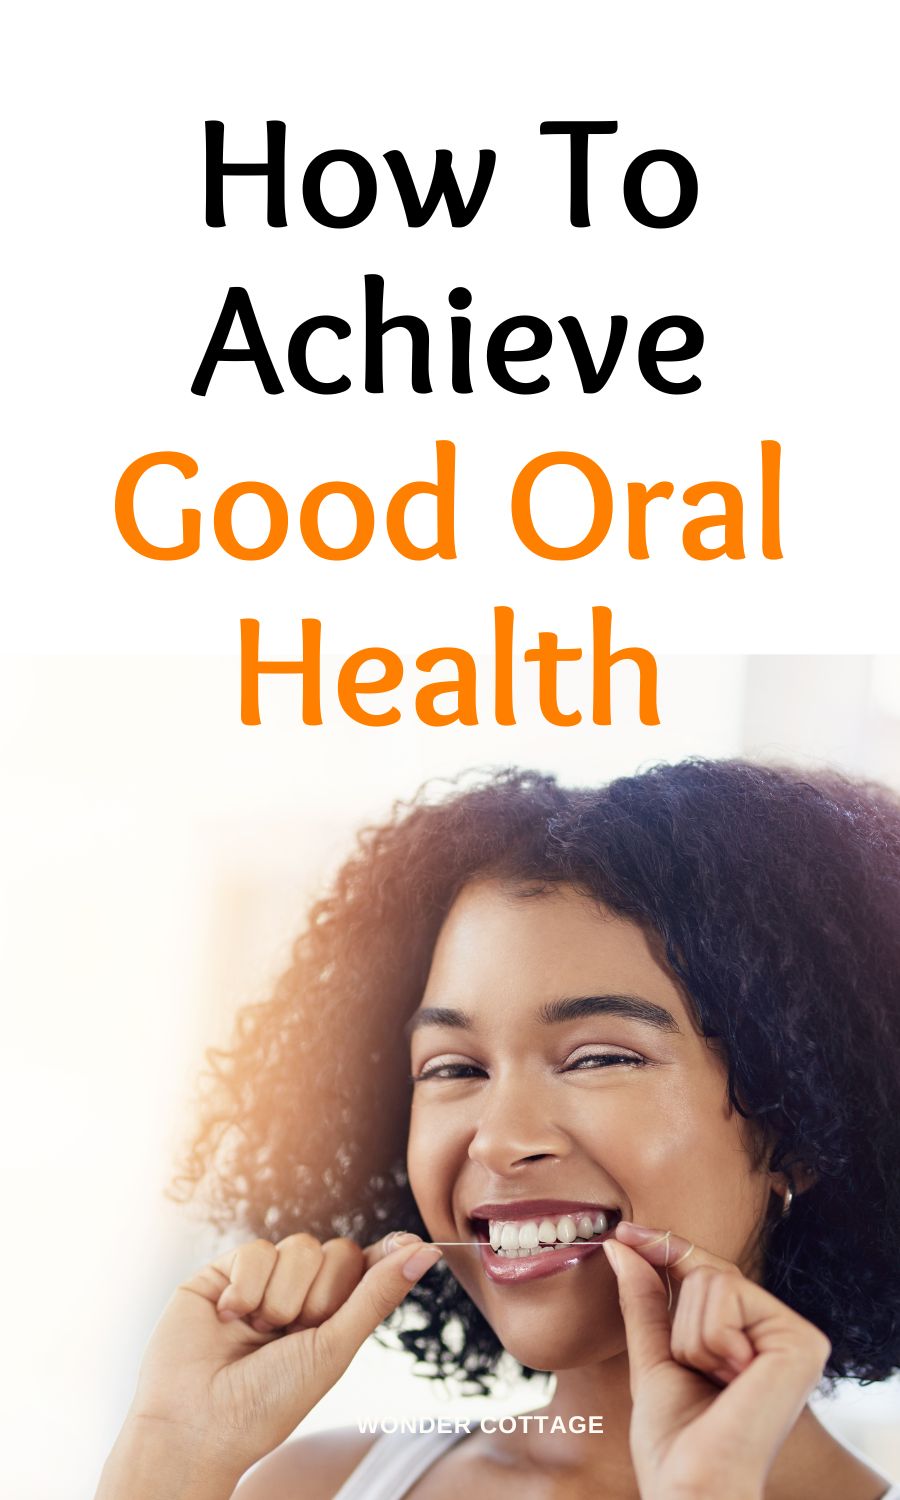 How To Achieve Good Oral Health